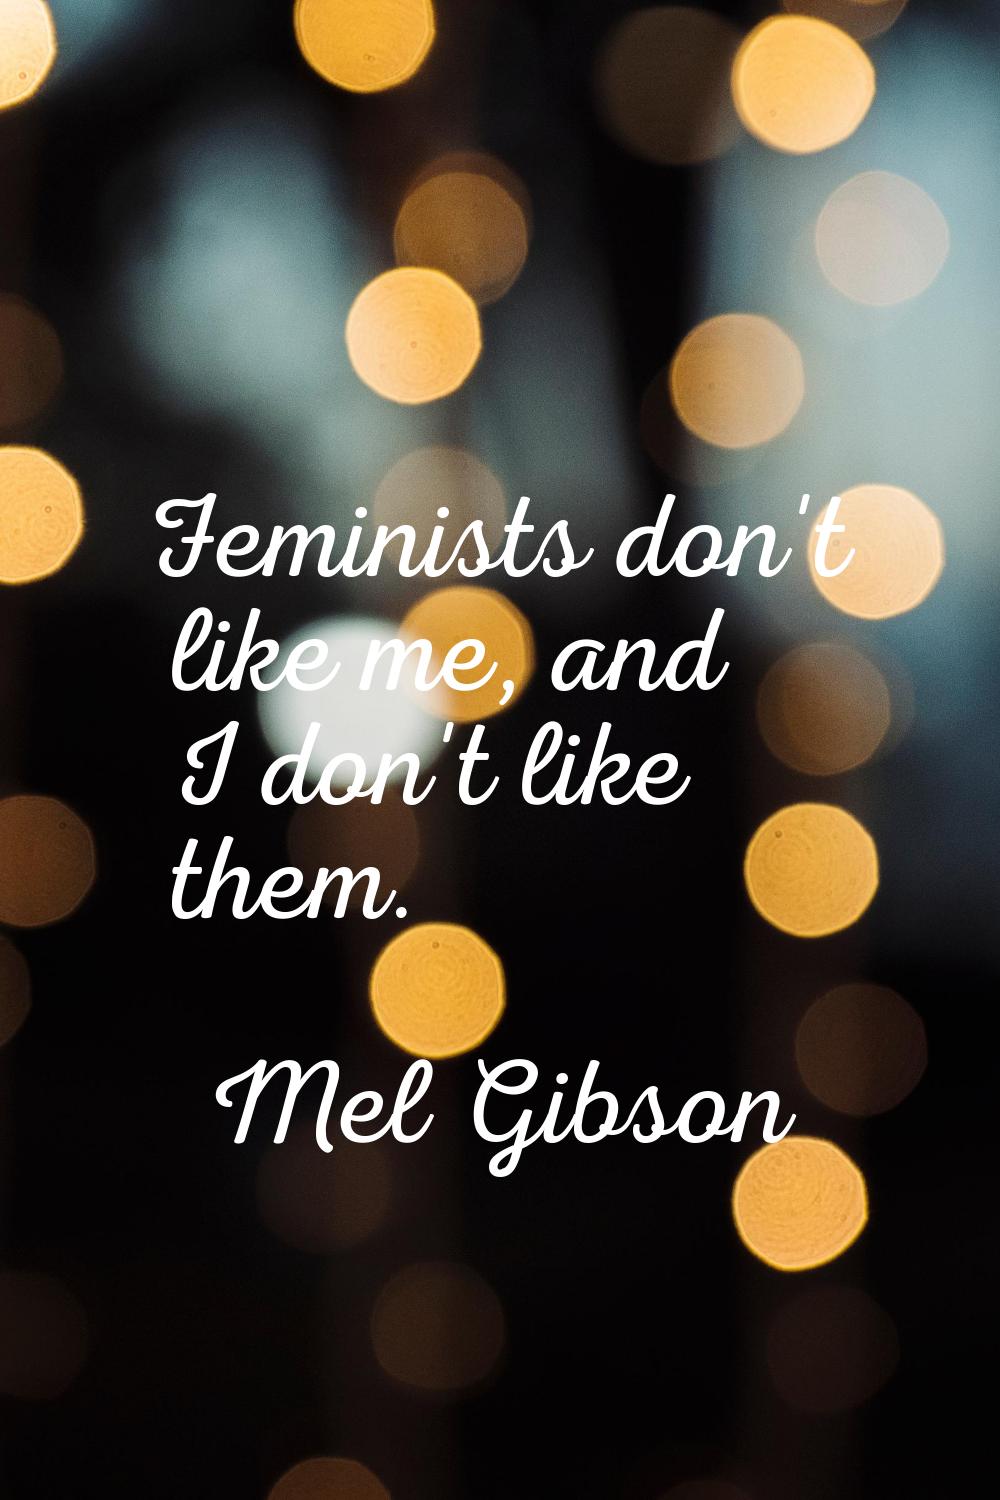 Feminists don't like me, and I don't like them.